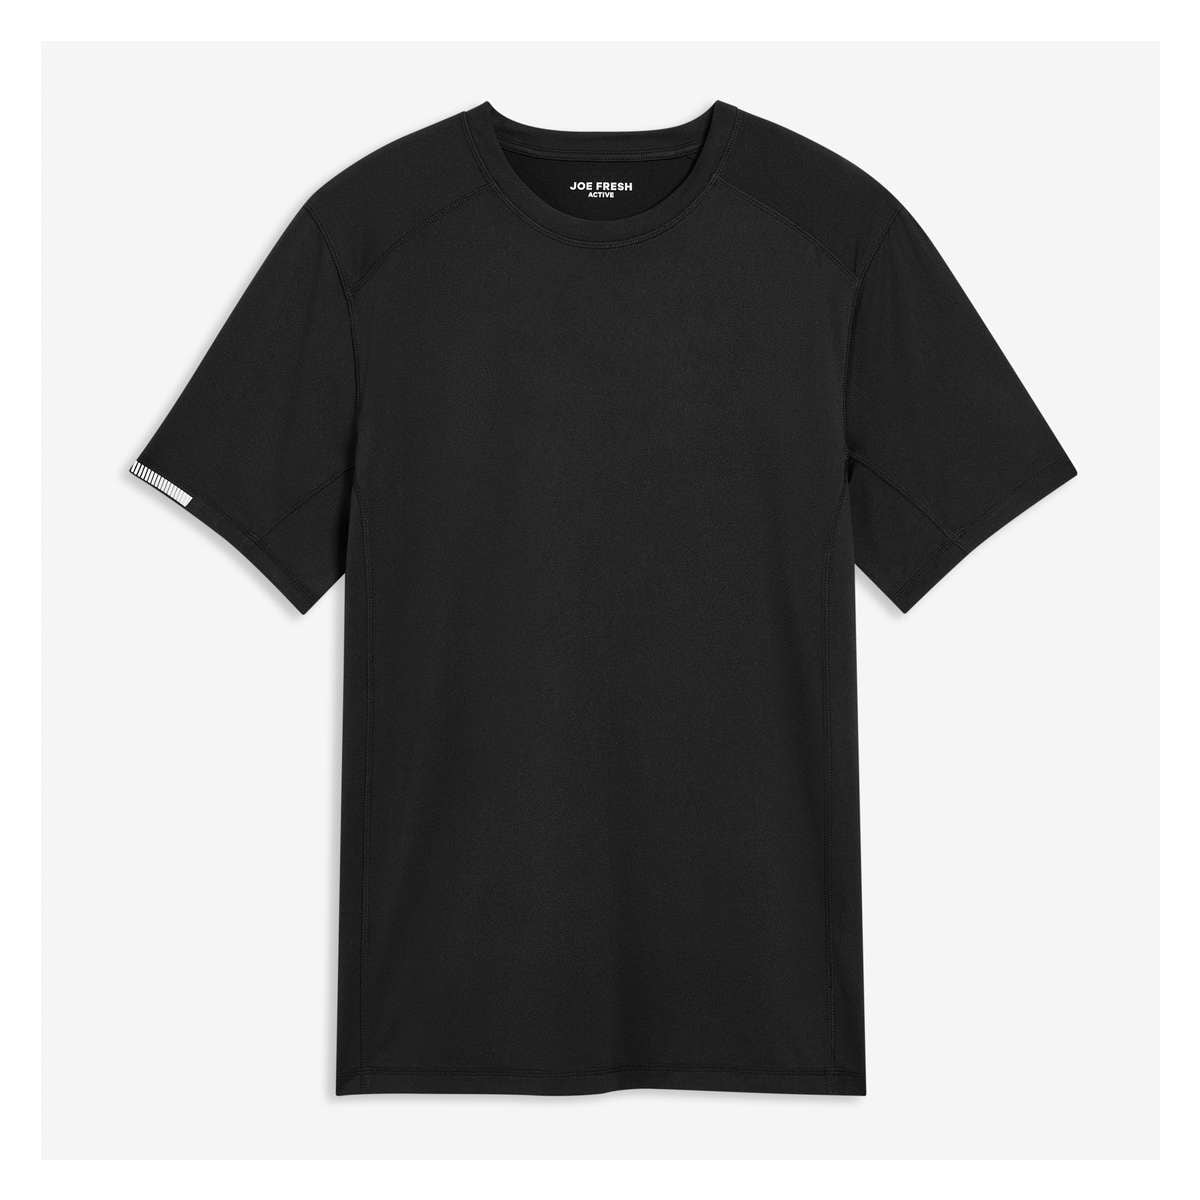 Buy Instadry® Men's Slim Fit Sports Tshirts For Sports Activities